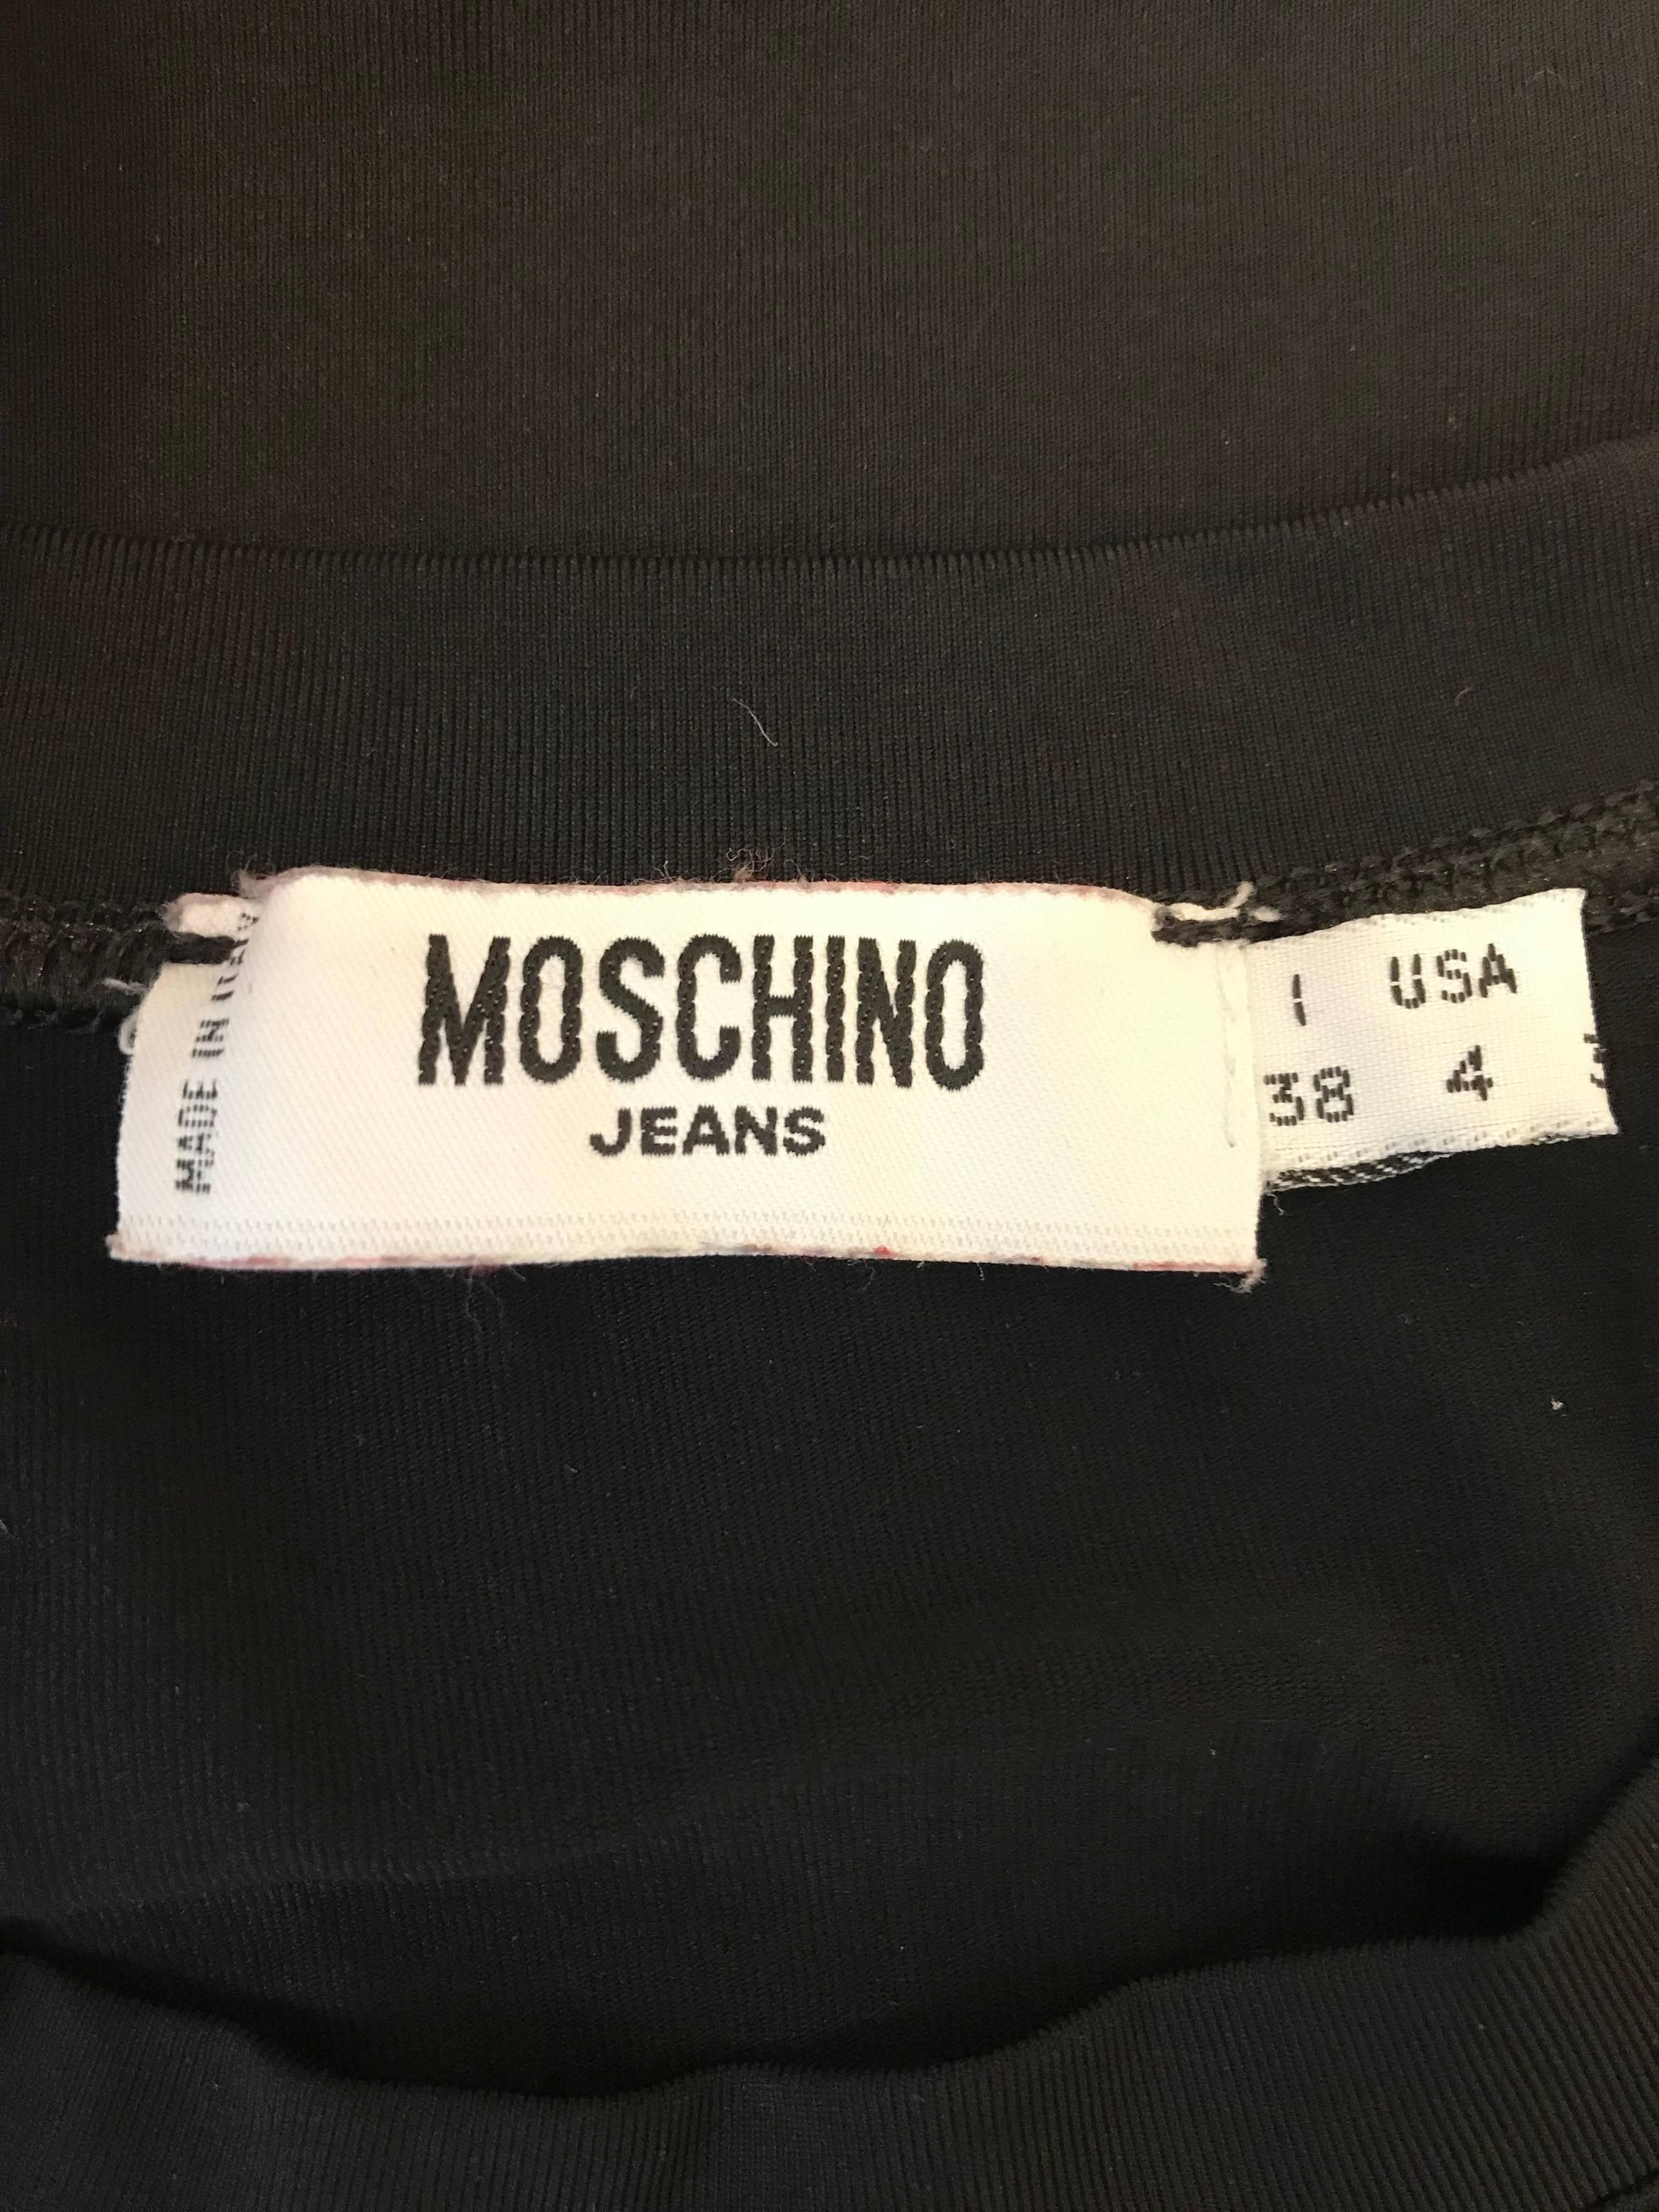 Moschino Jeans Hungry for Love Vintage 1990s Black Long Sleeved Shirt Top 1